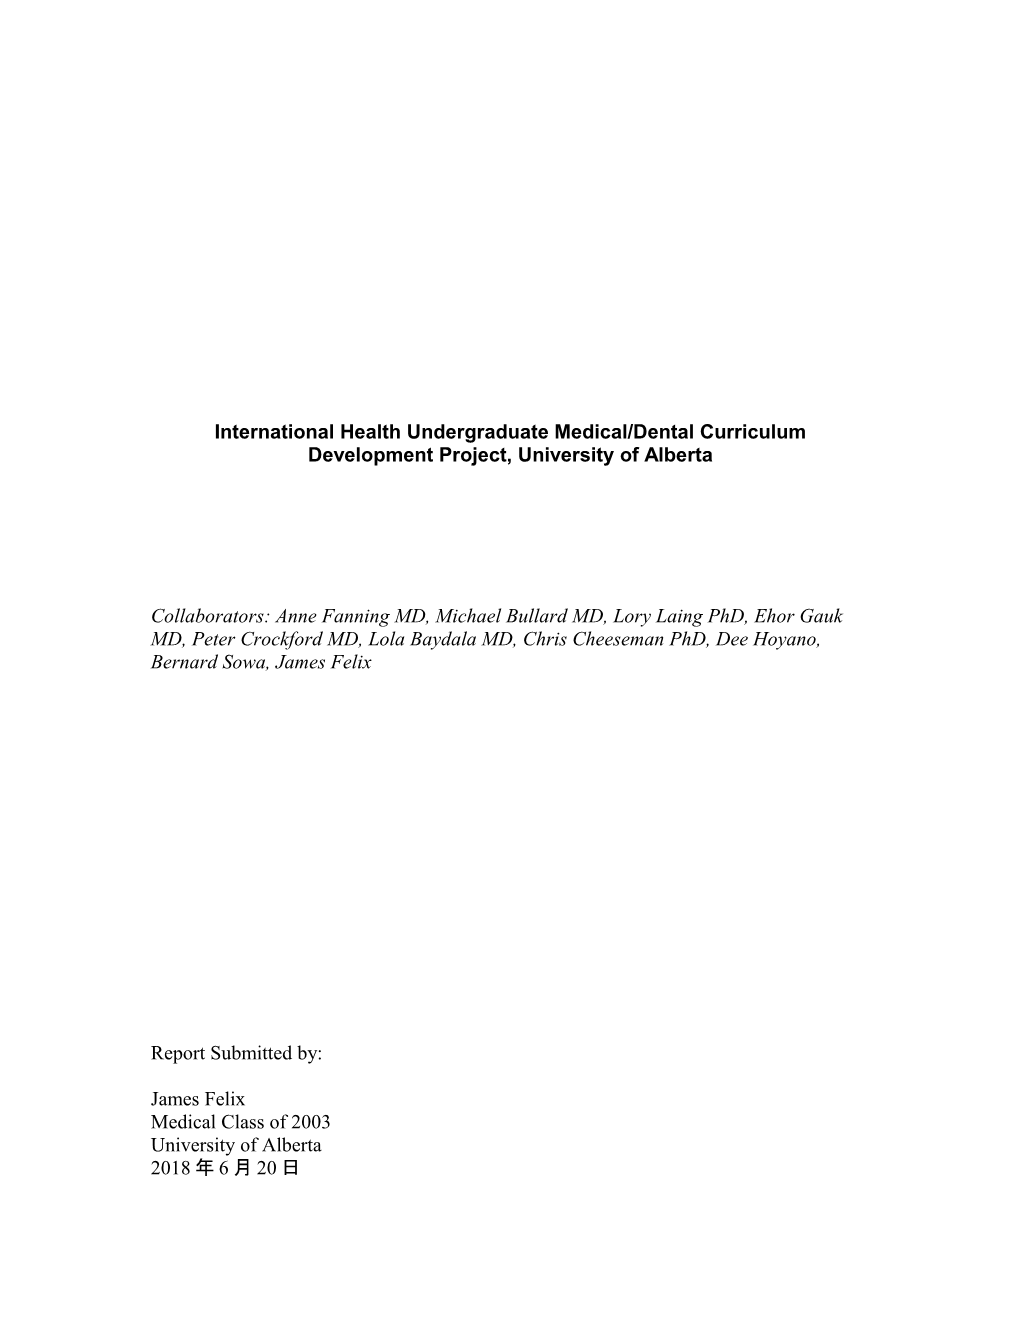 Assessment, Evaluation and Implementation of International Health Content Into a Current